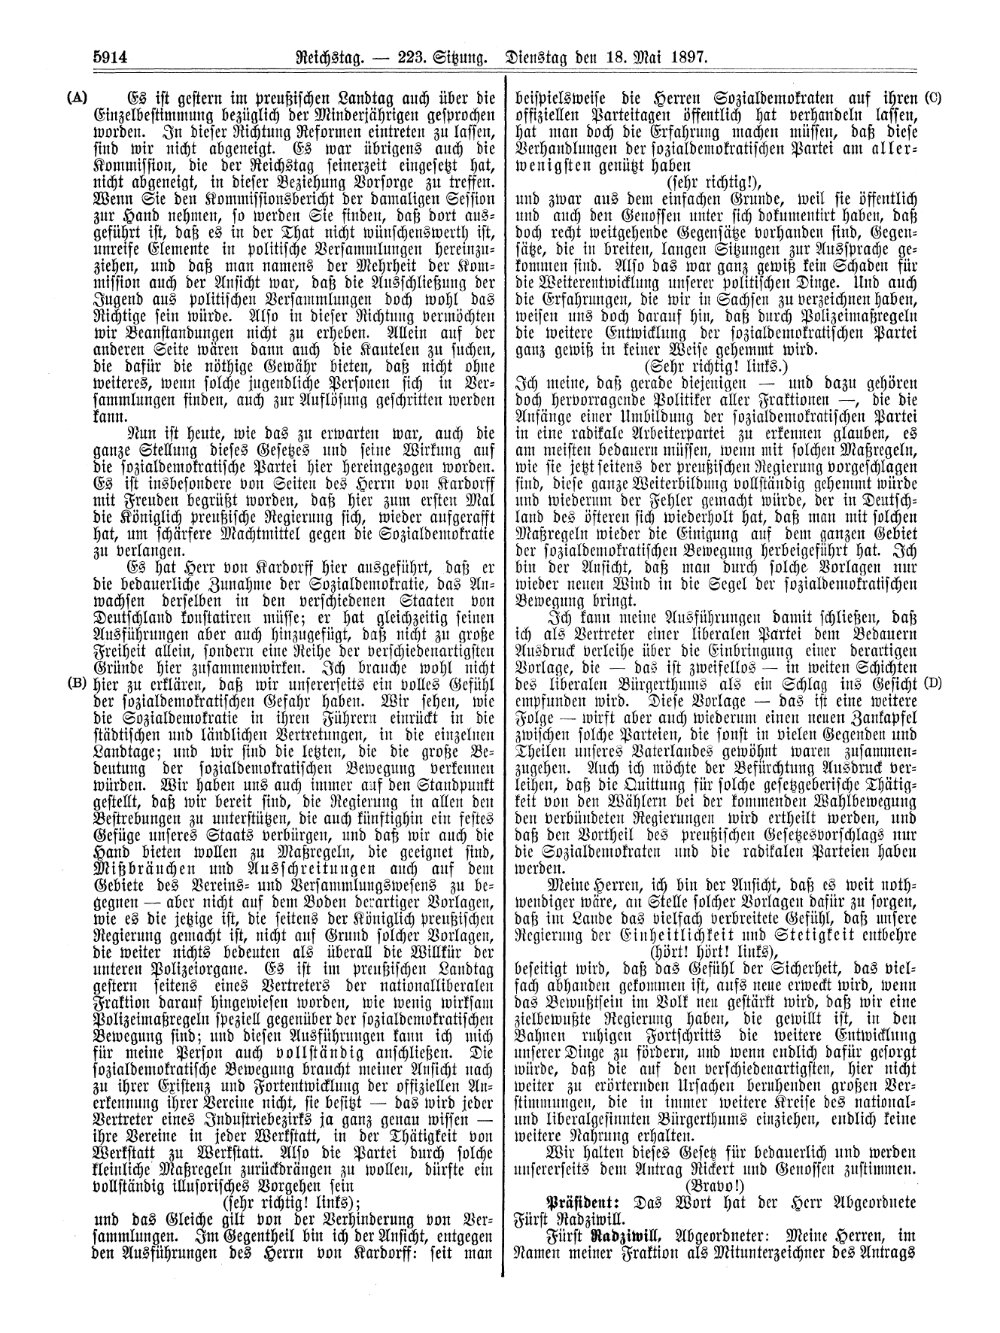 Scan of page 5914